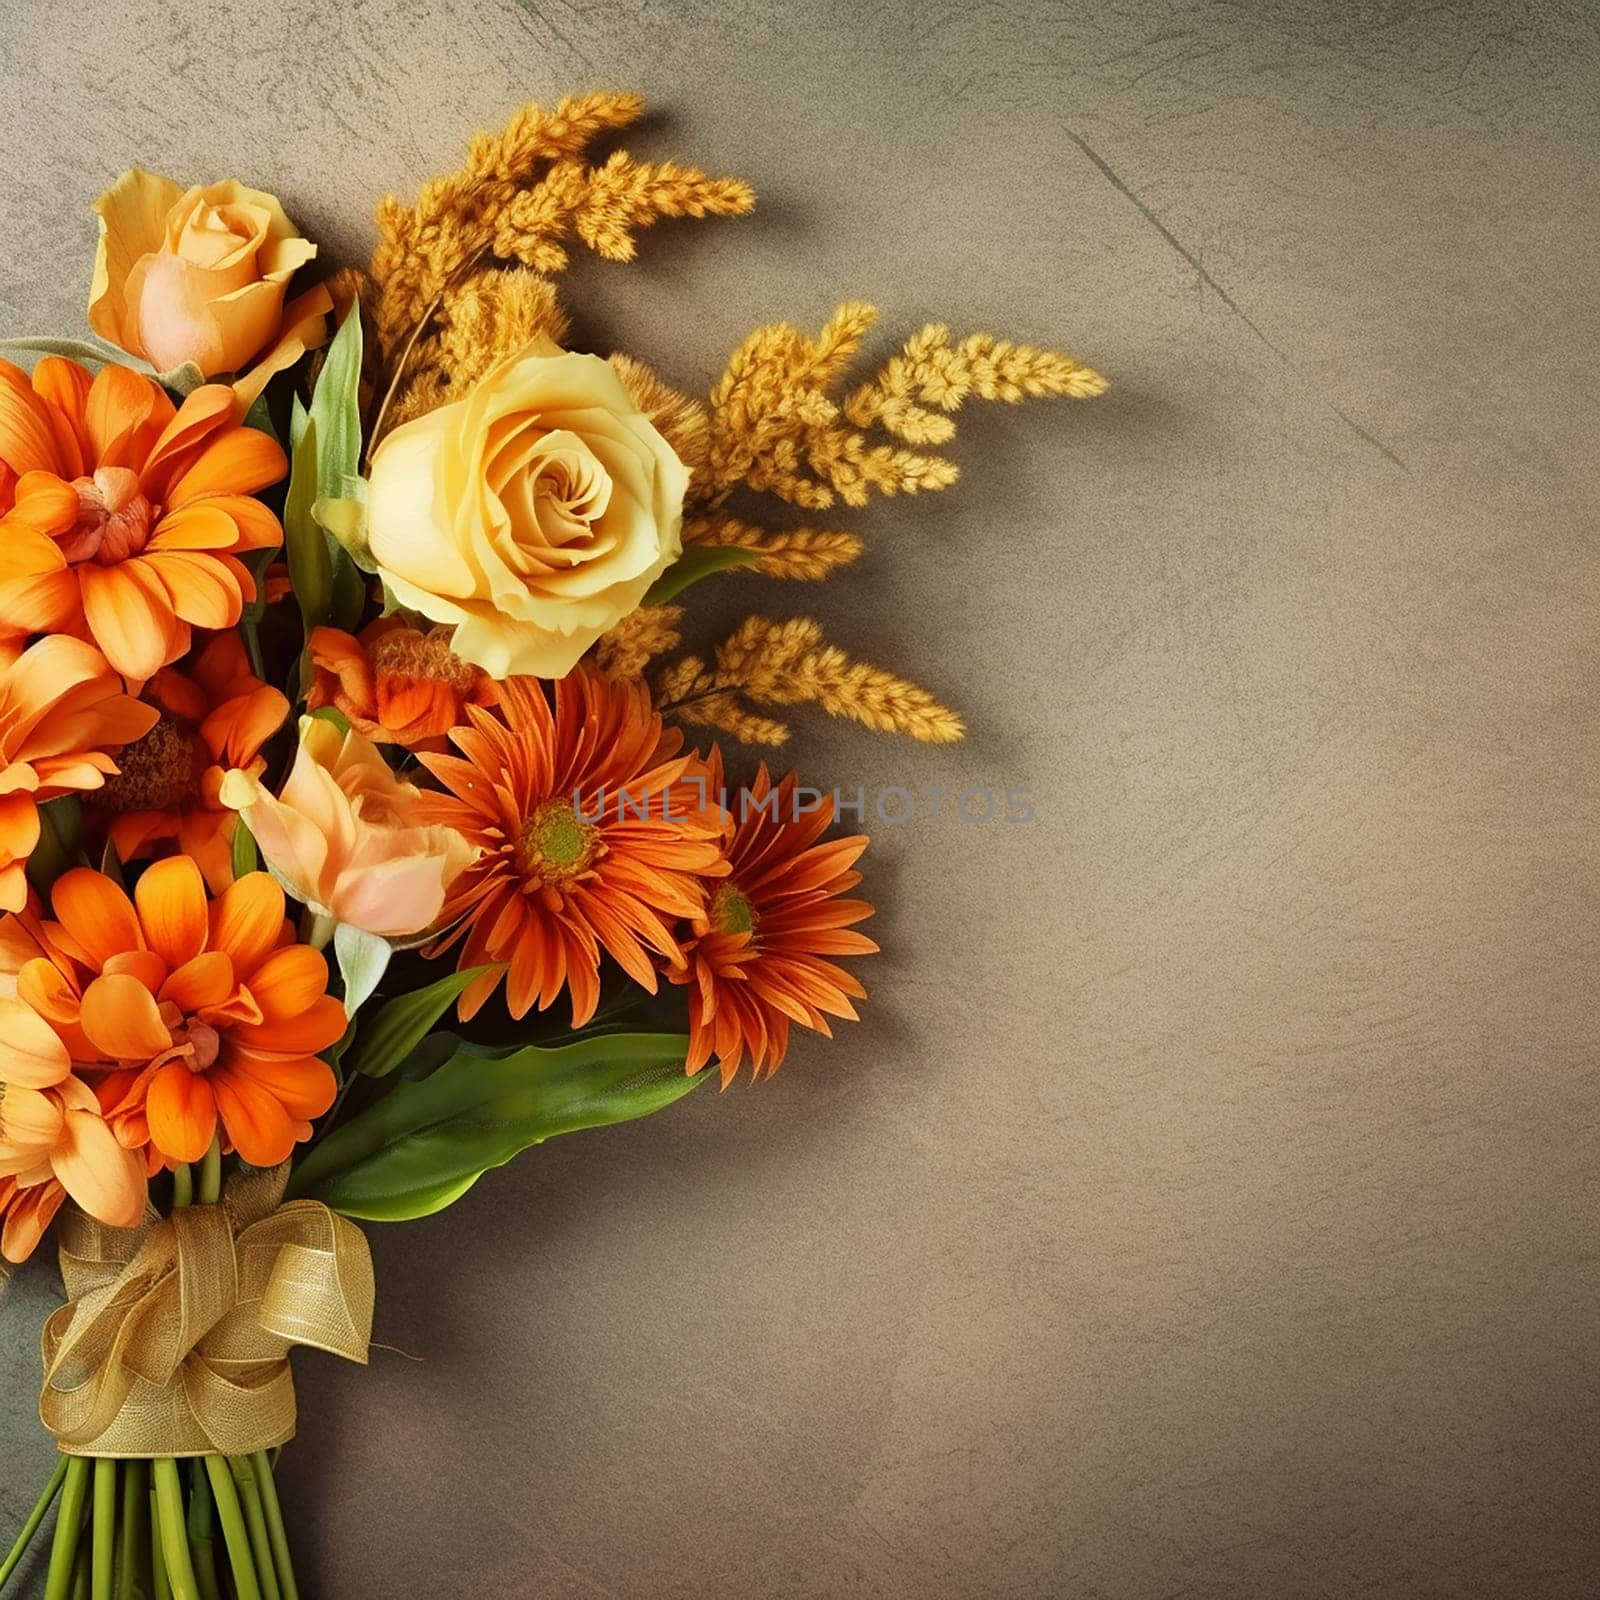 A bouquet with orange flowers, roses, and wheat on a textured background.